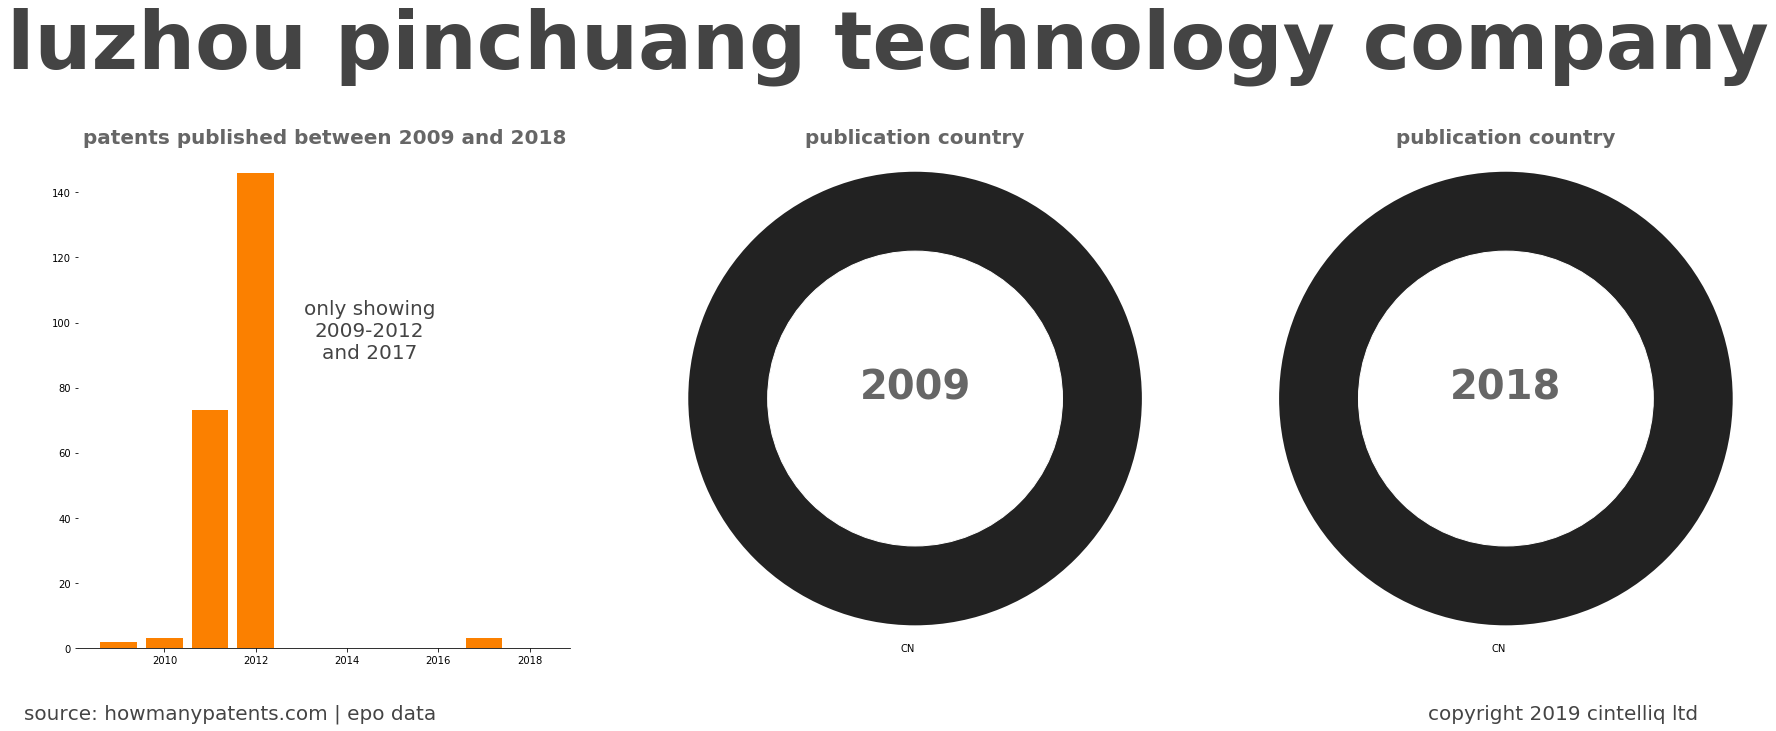 summary of patents for Luzhou Pinchuang Technology Company